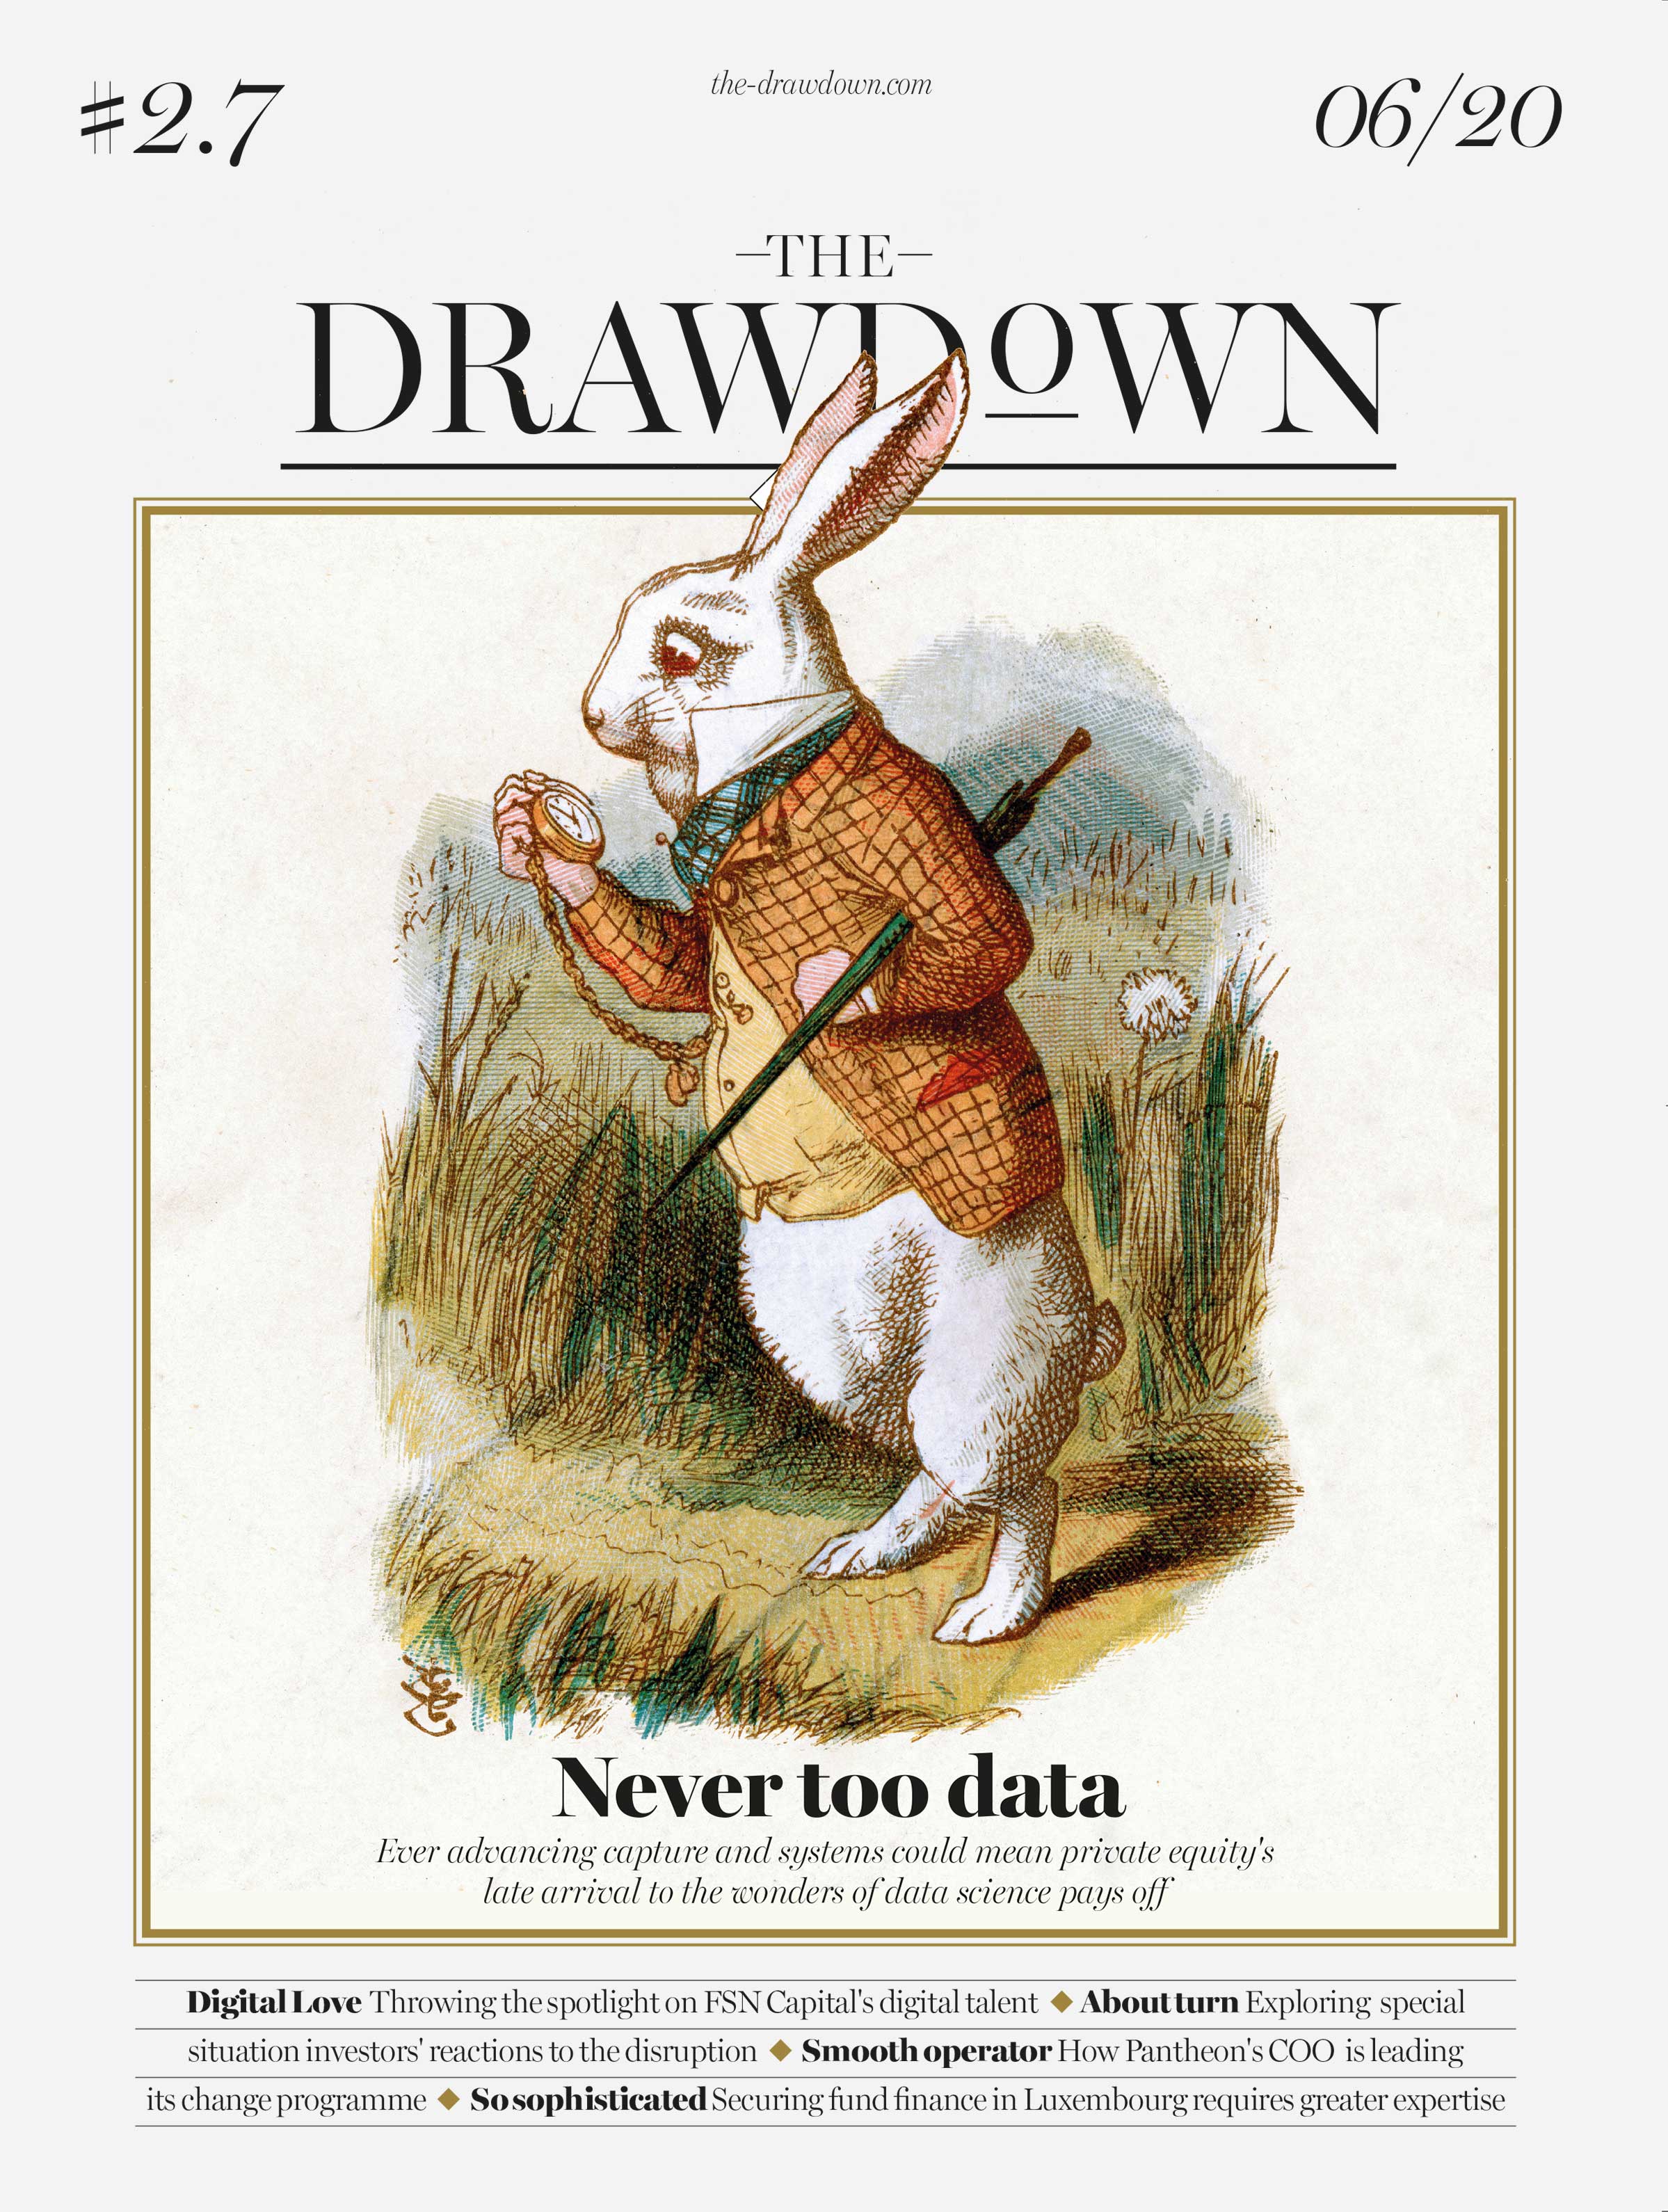 The Drawdown Issue June 2020 Cover